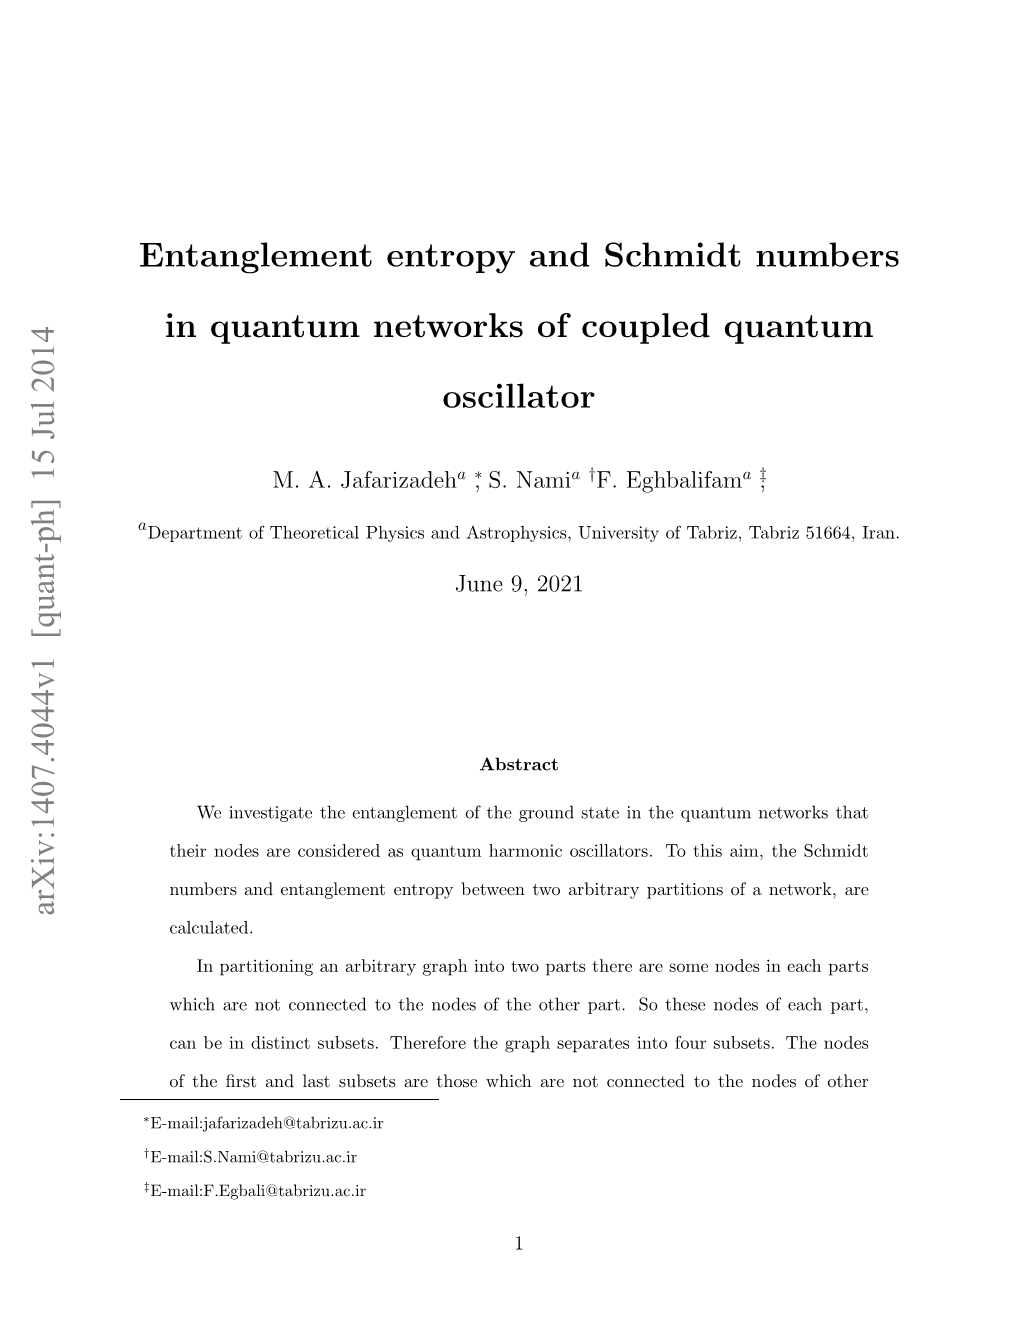 Entanglement Entropy and Schmidt Numbers in Quantum Networks Of